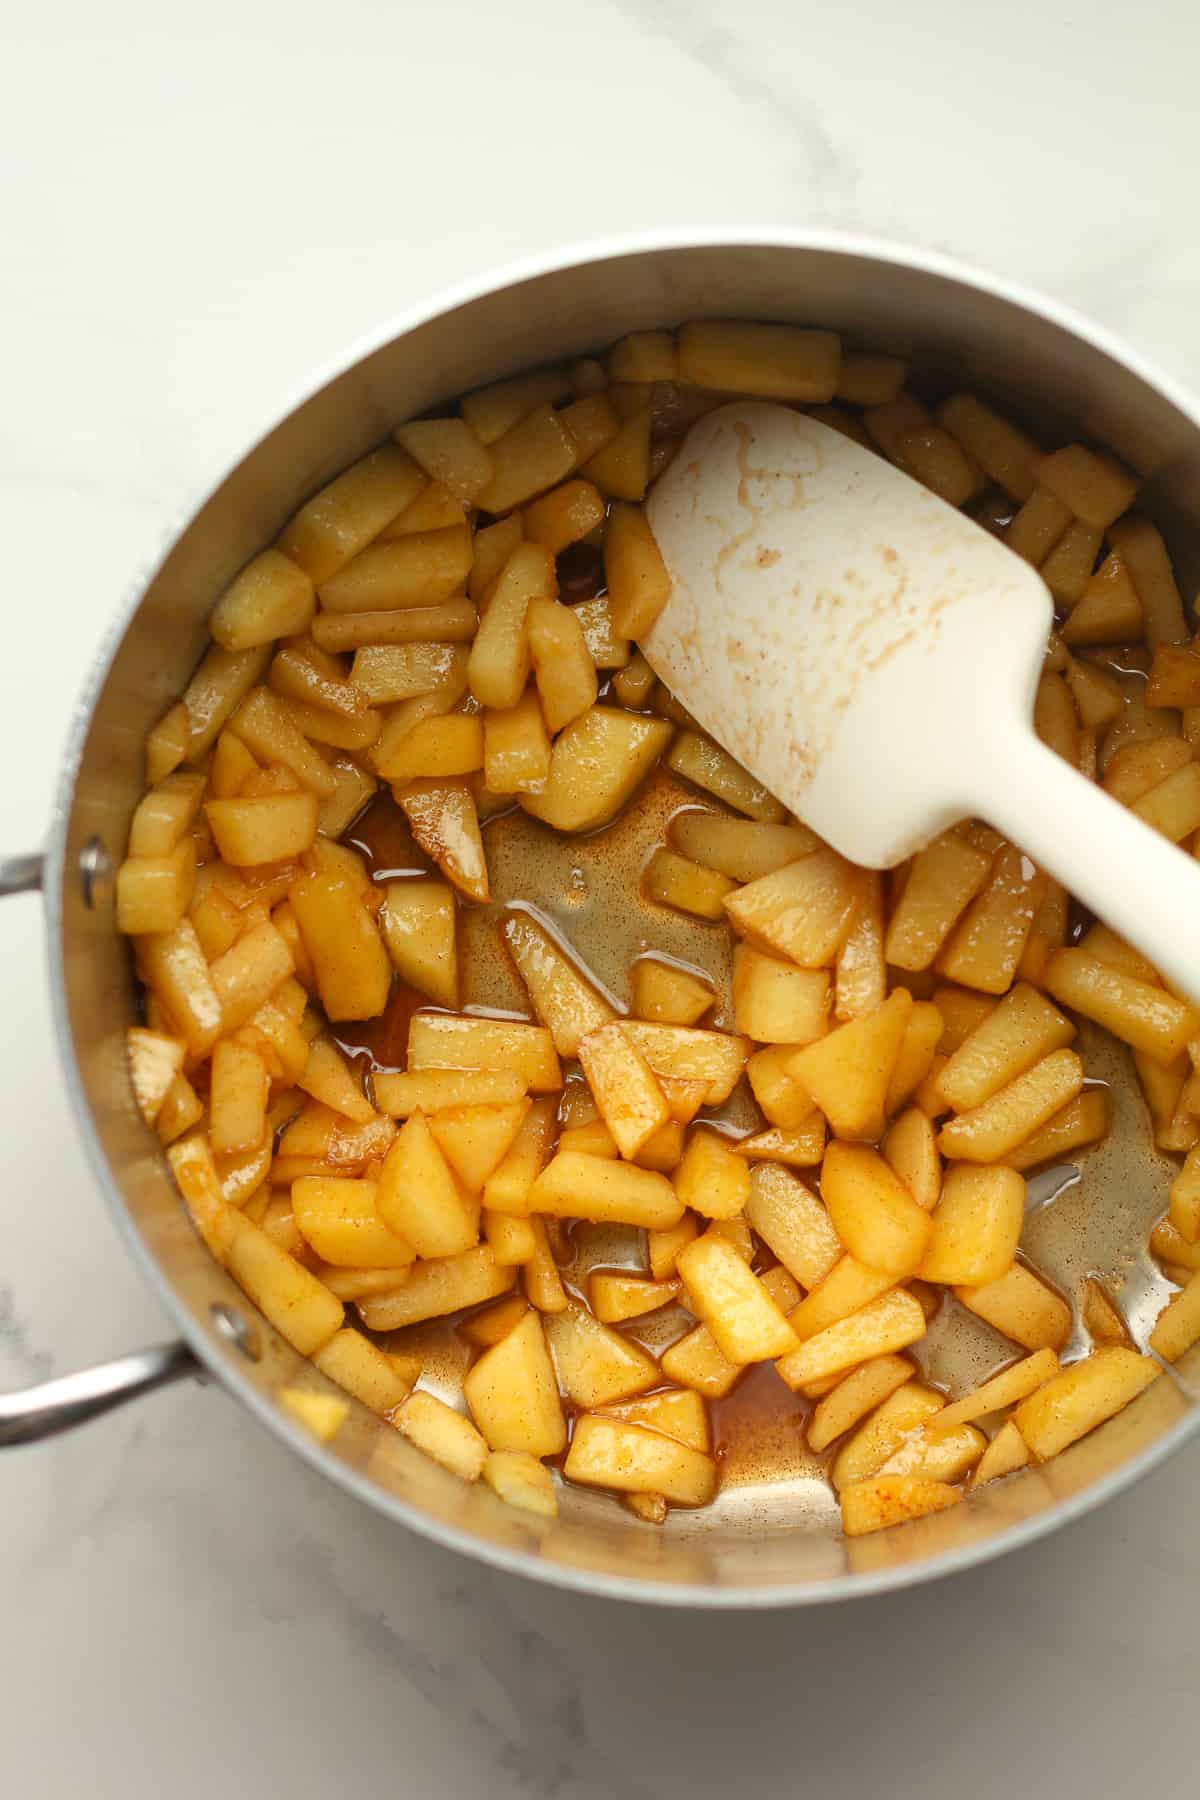 A pan of the cooked apple chunks.